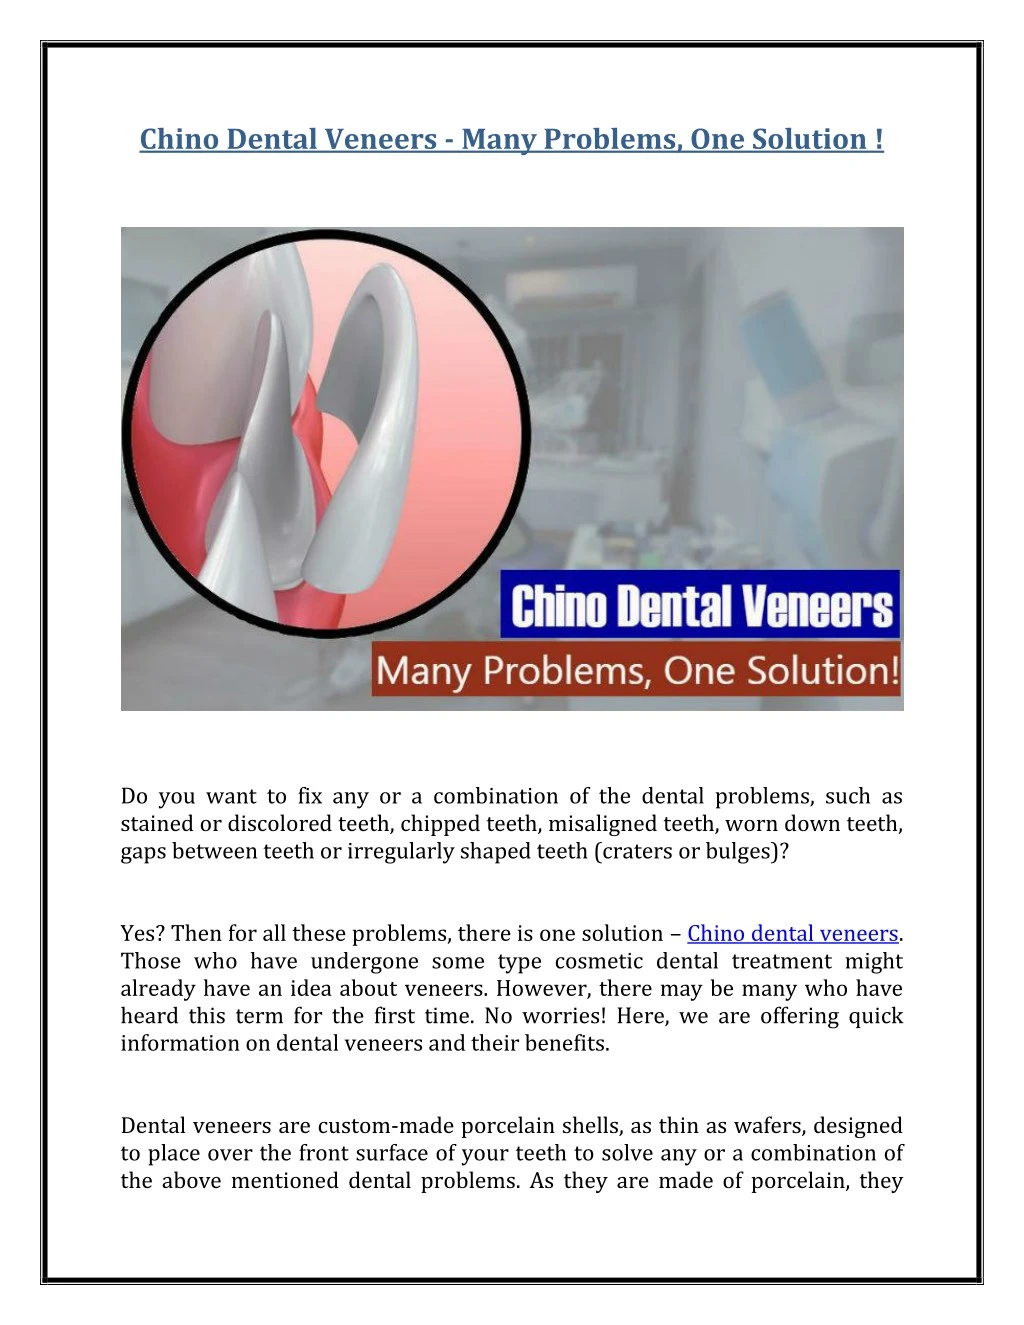 chino dental veneers many problems one solution